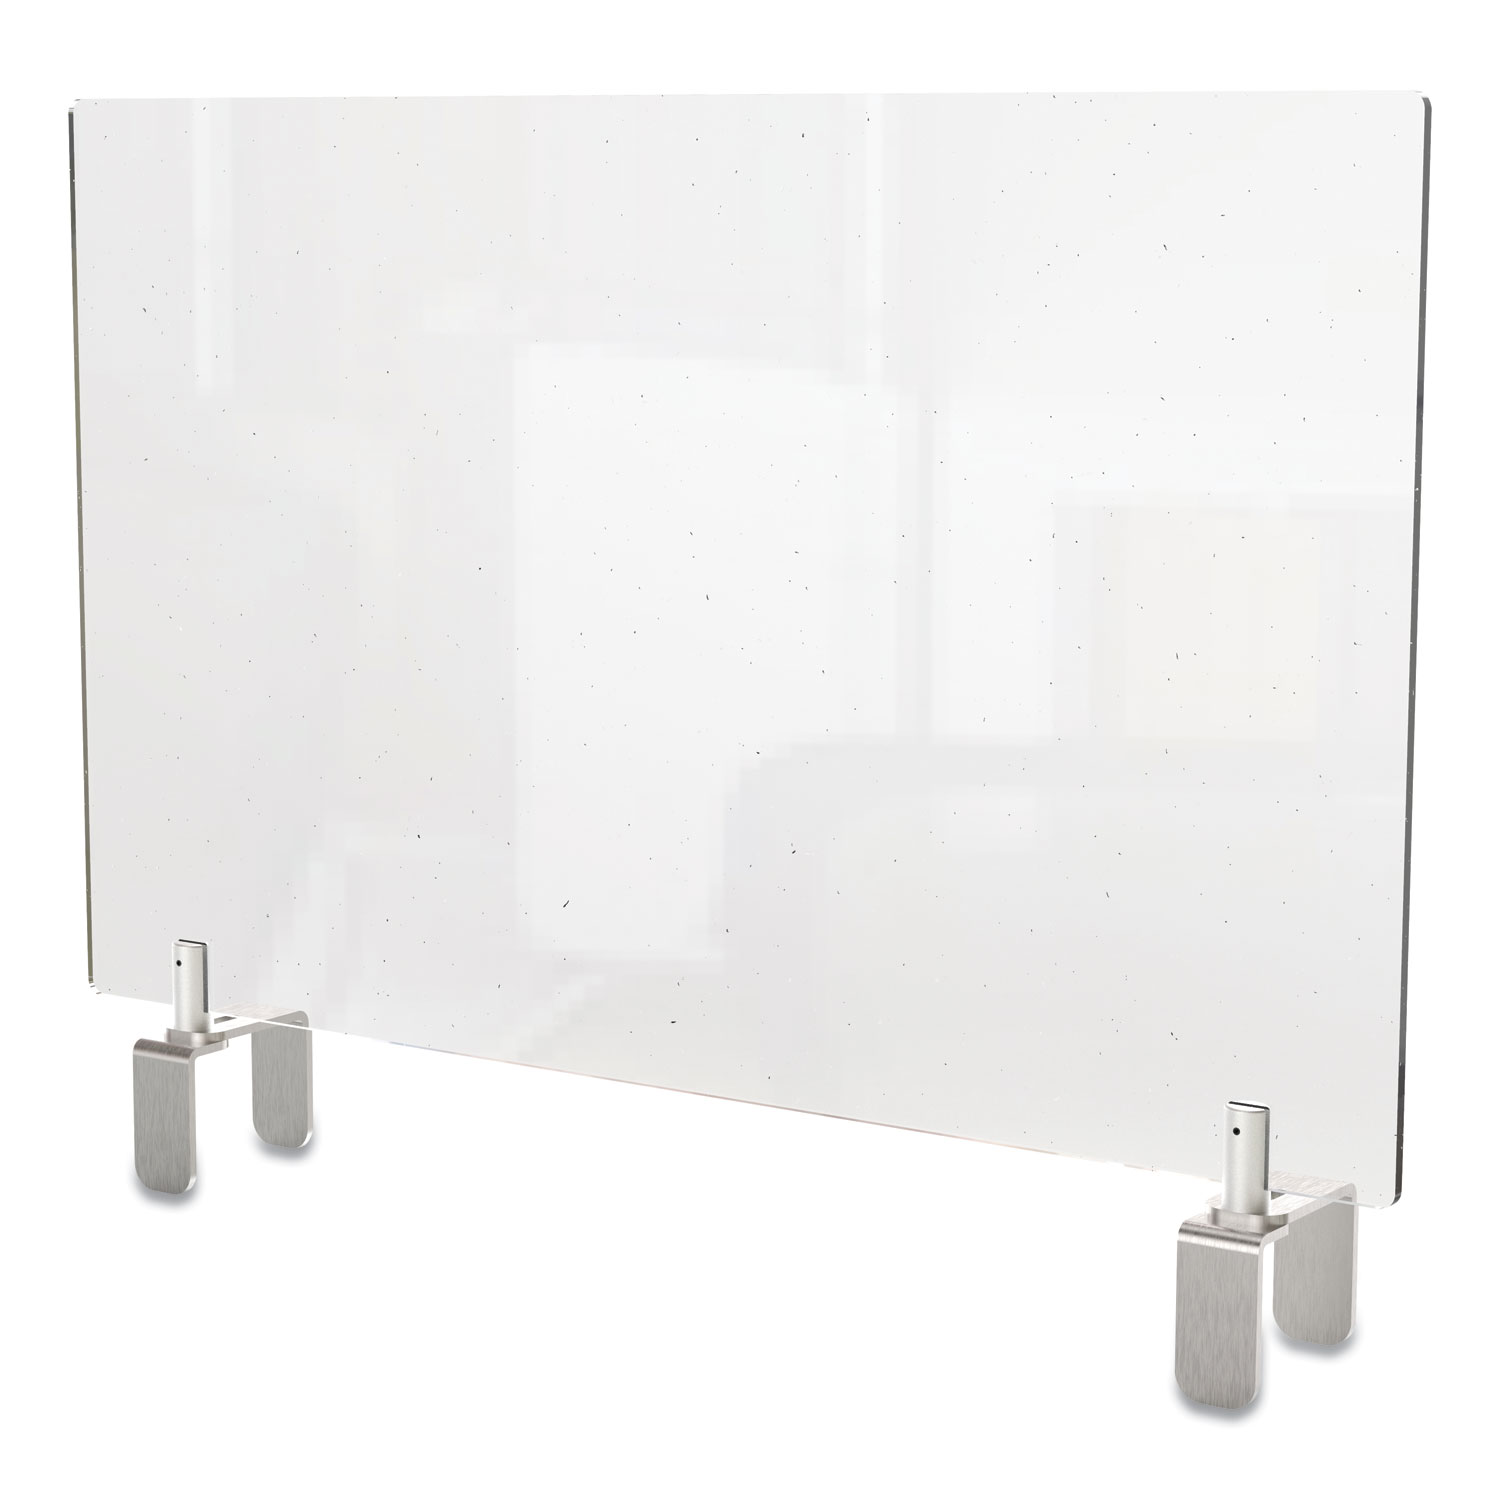  Ghent PEC1836-A Clear Partition Extender with Attached Clamp, 36 x 3.88 x 18, Thermoplastic Sheeting (GHEPEC1836A) 